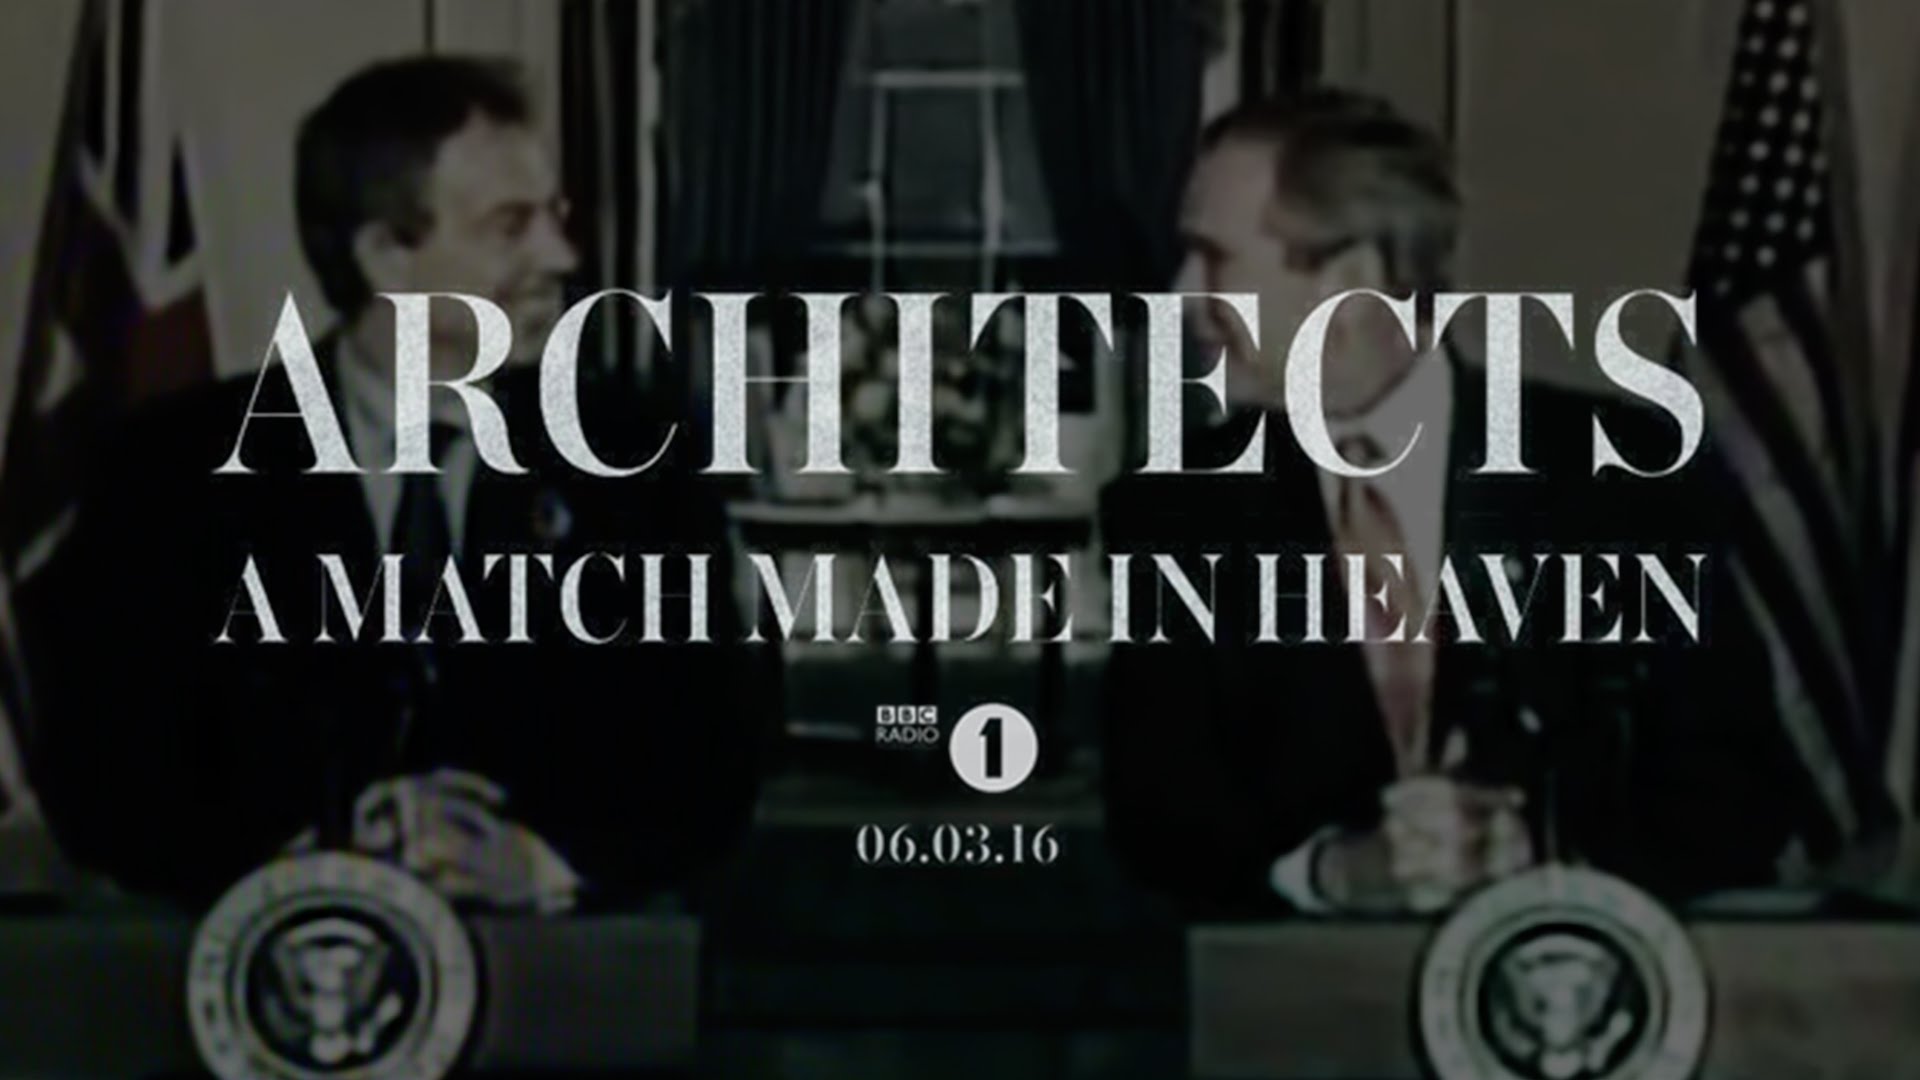 Architects - "A Match Made In Heaven"